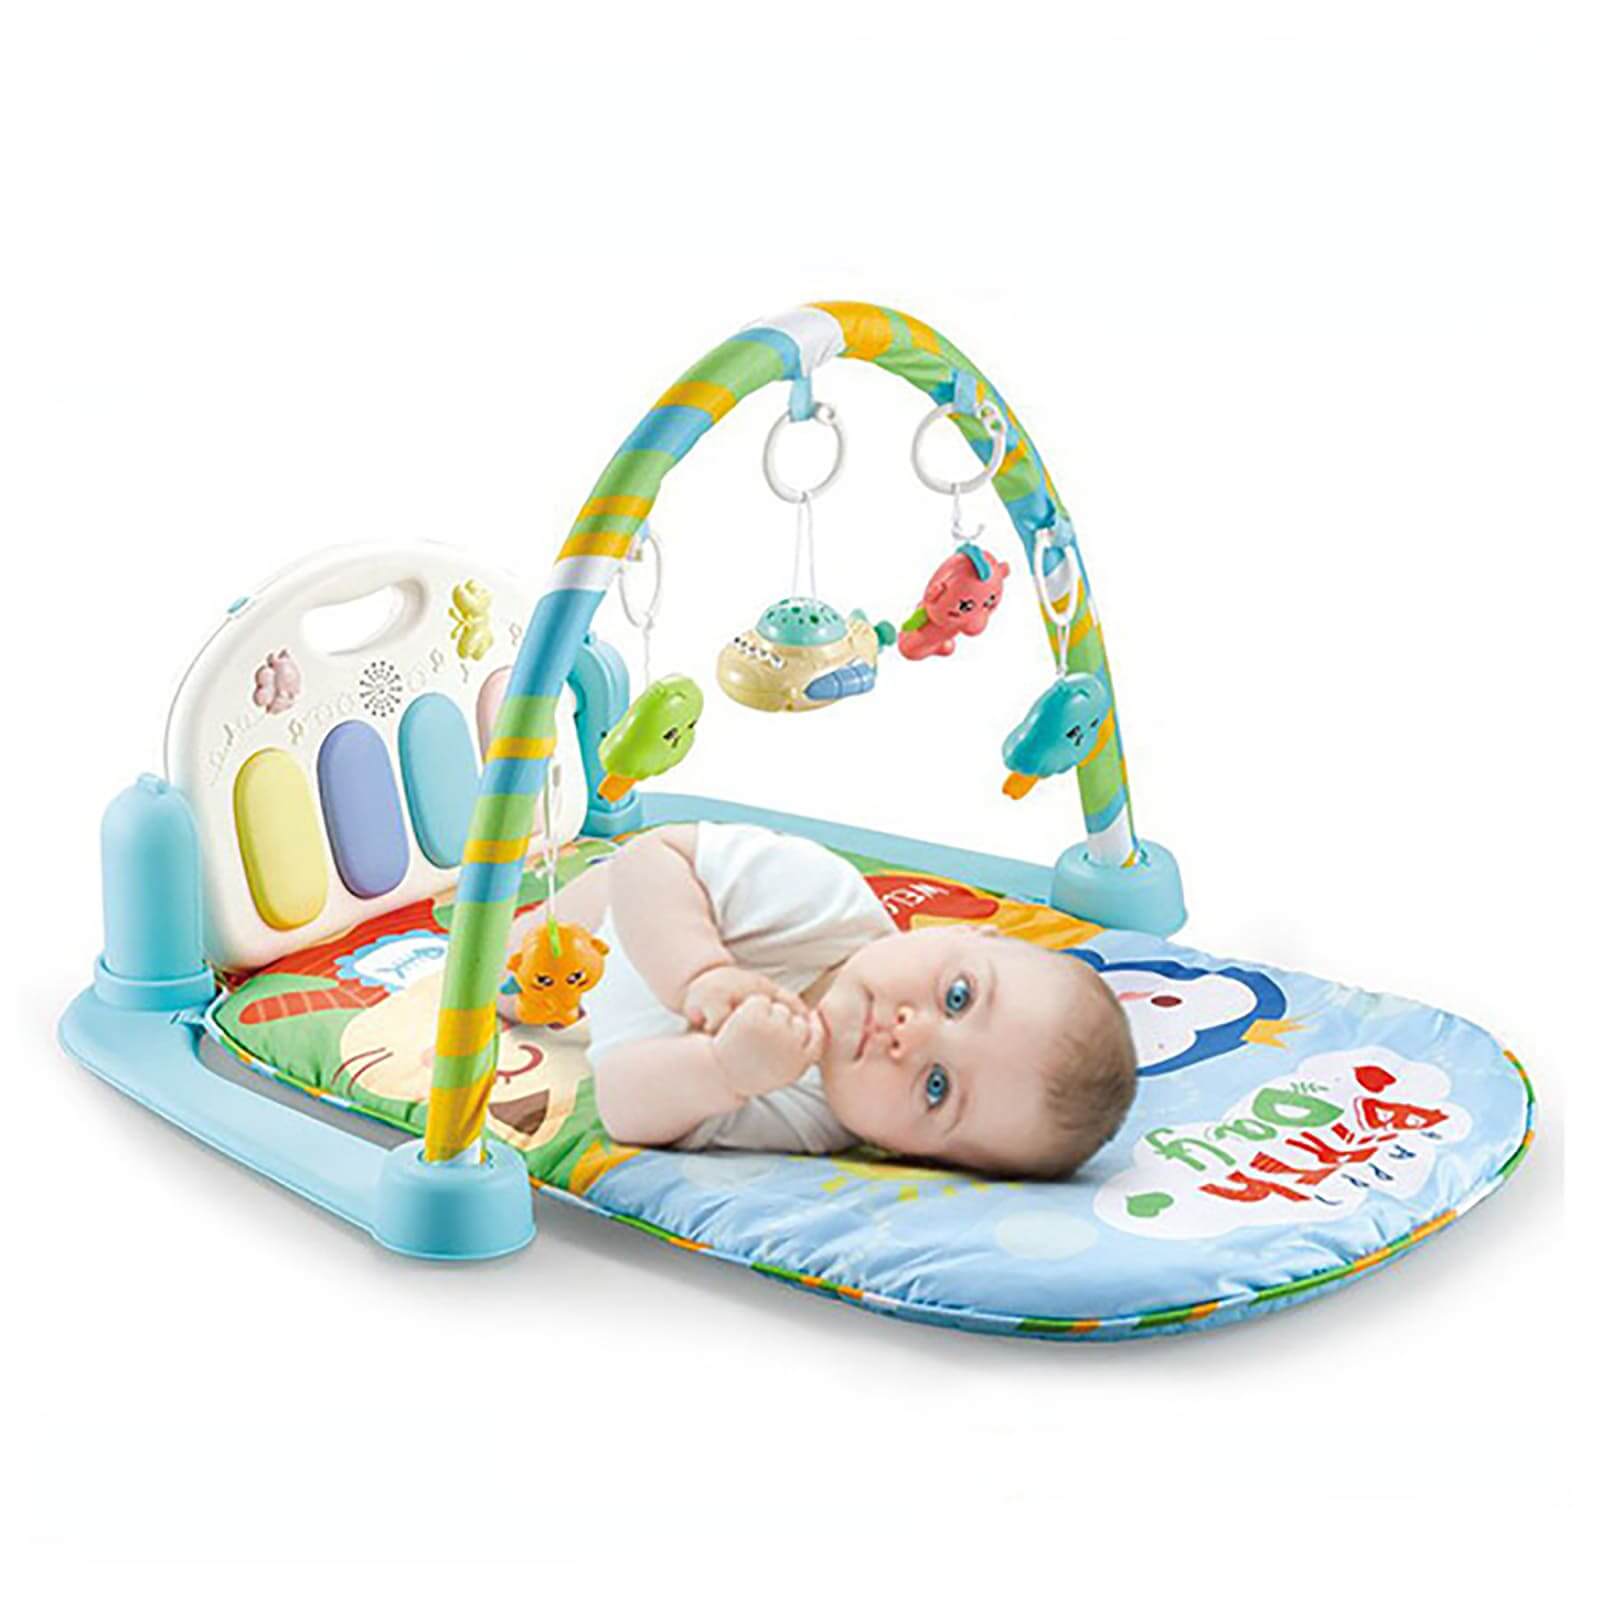 5 in 1 RC projection pedal piano for babies to sit and play with rattles and music